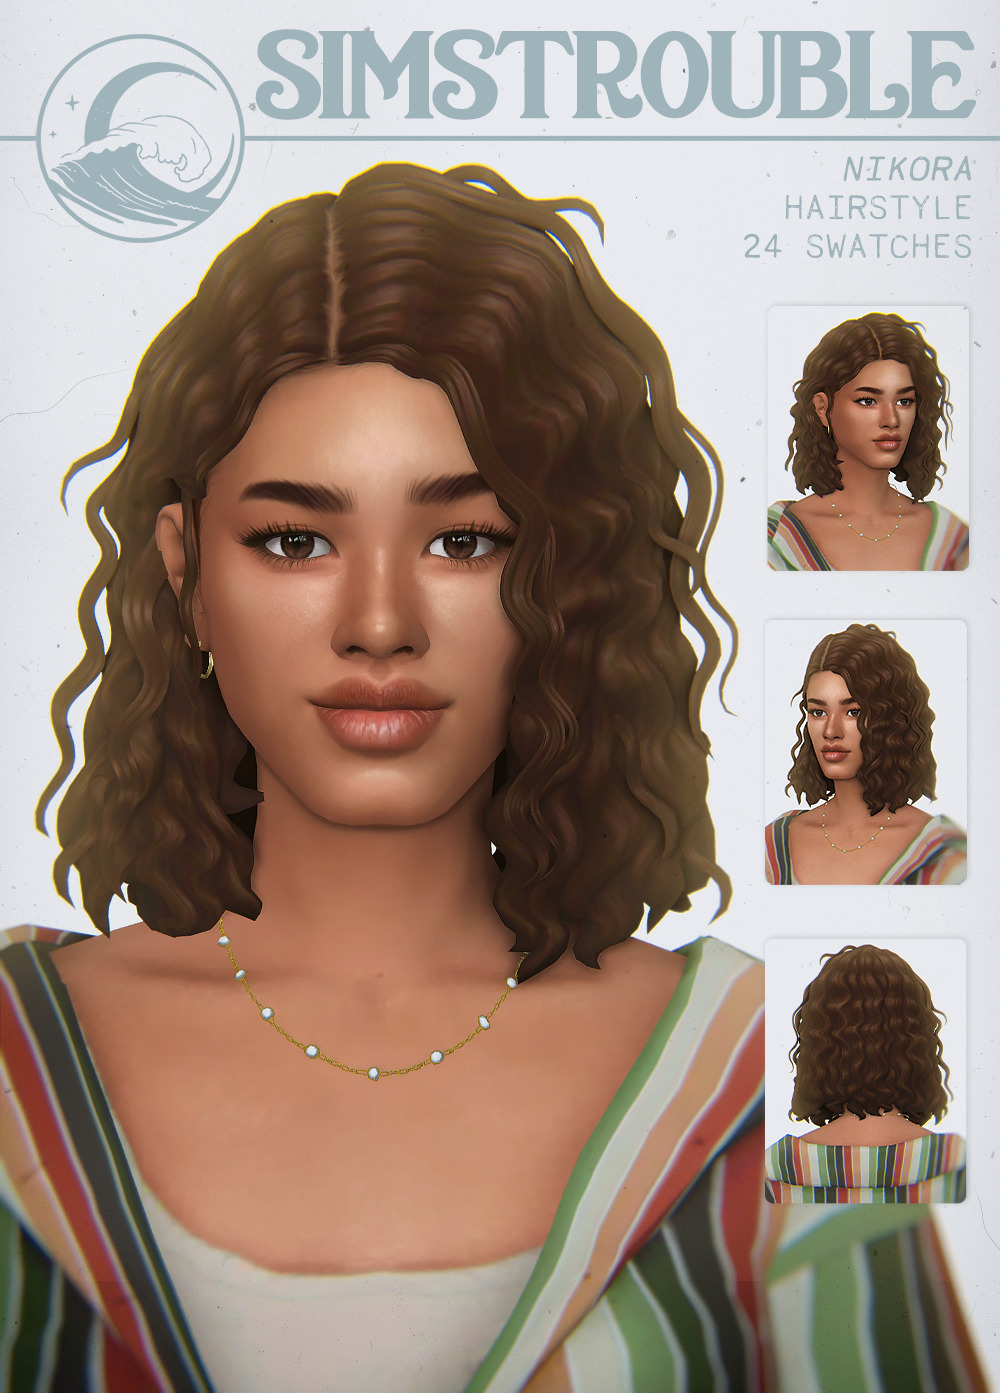 NIKORA by simstrouble• Base Game Compatible, works for all frames
• 24 Swatches
• All LODs, Hat Compatible, All Maps, 14k poly
download (Patreon, free) | Instagram | Pinterest